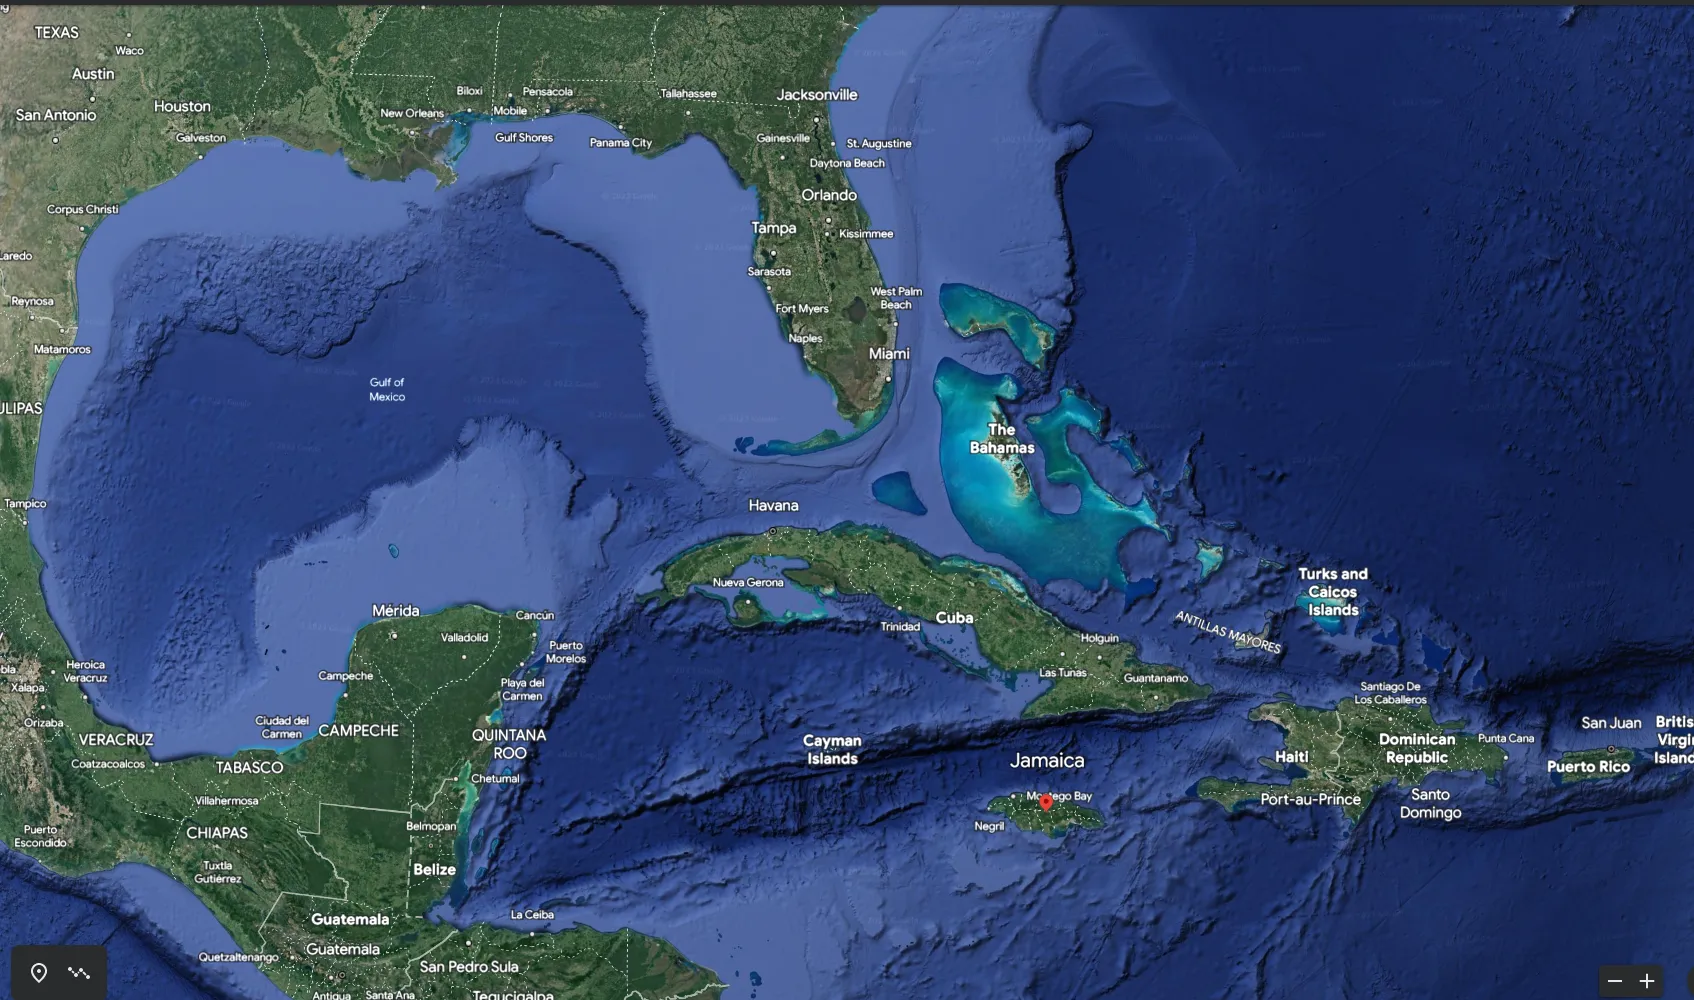 Zoomed in location of where Jamaica is on the map